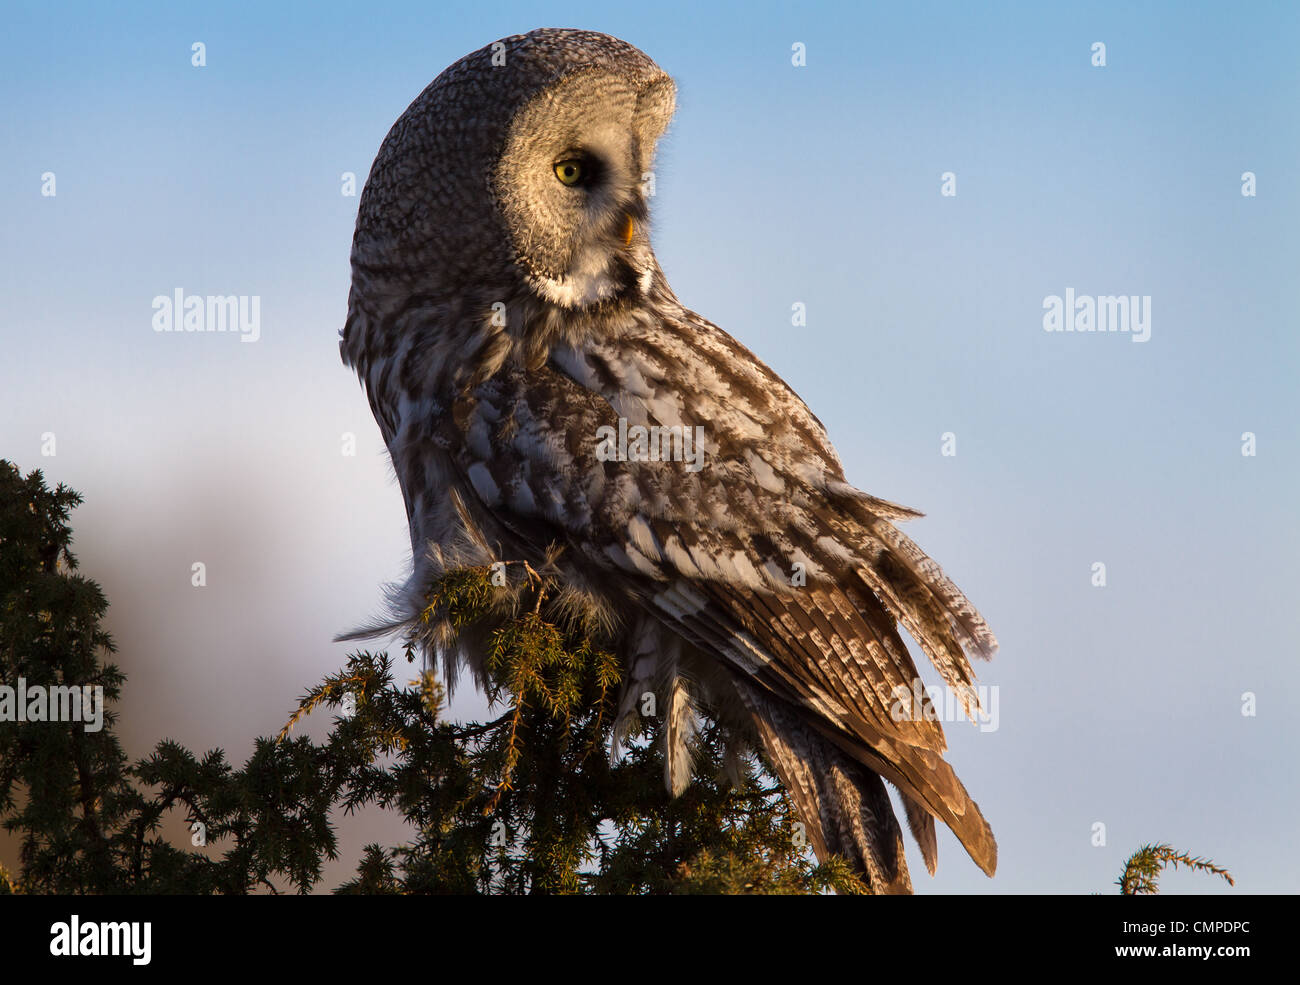 A Great grey owl sitting in a tree Stock Photo